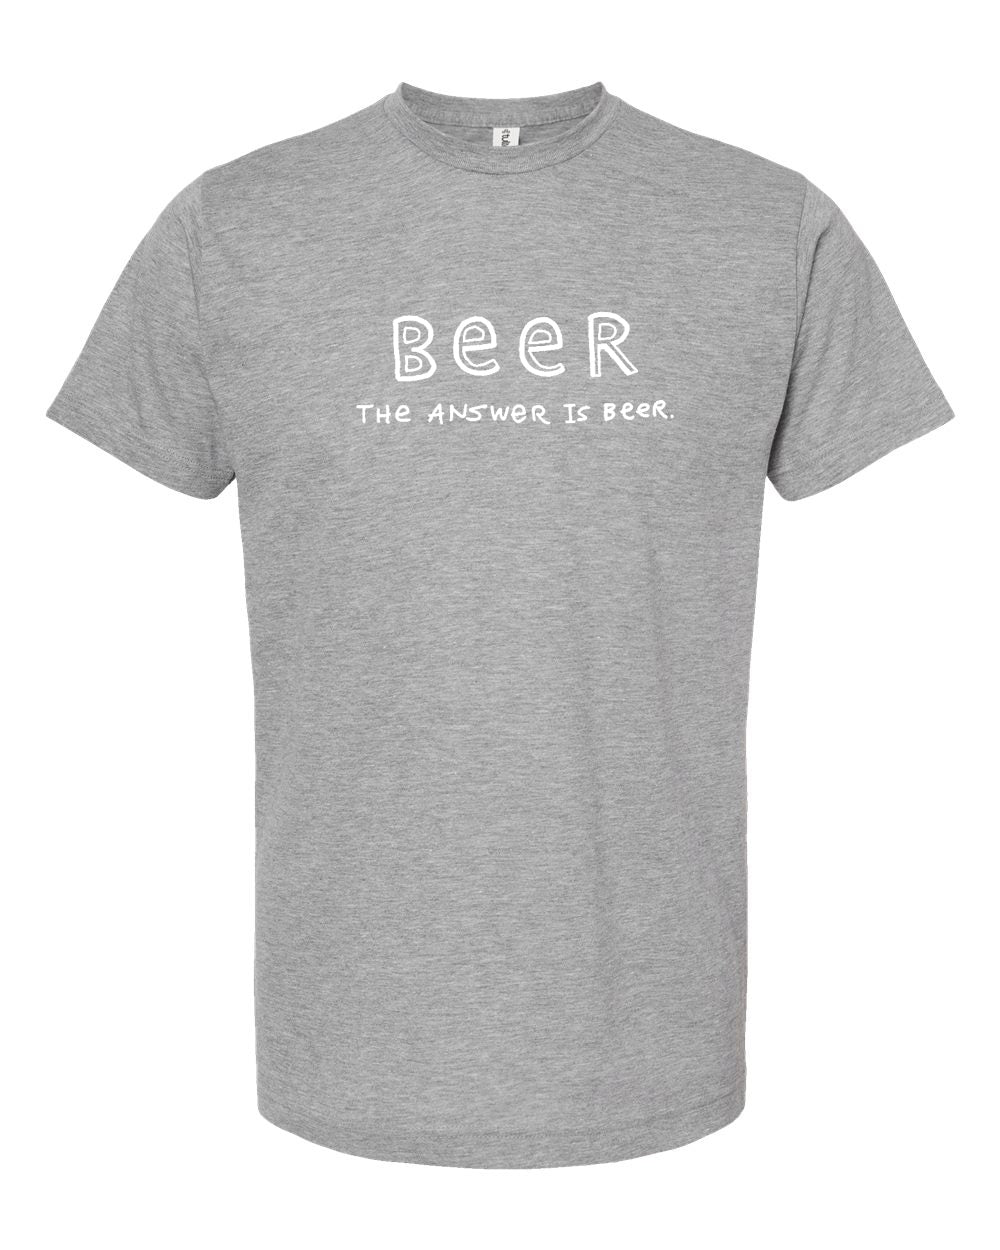 Beer is the Answer : Unisex Tee (Tri-Gray)